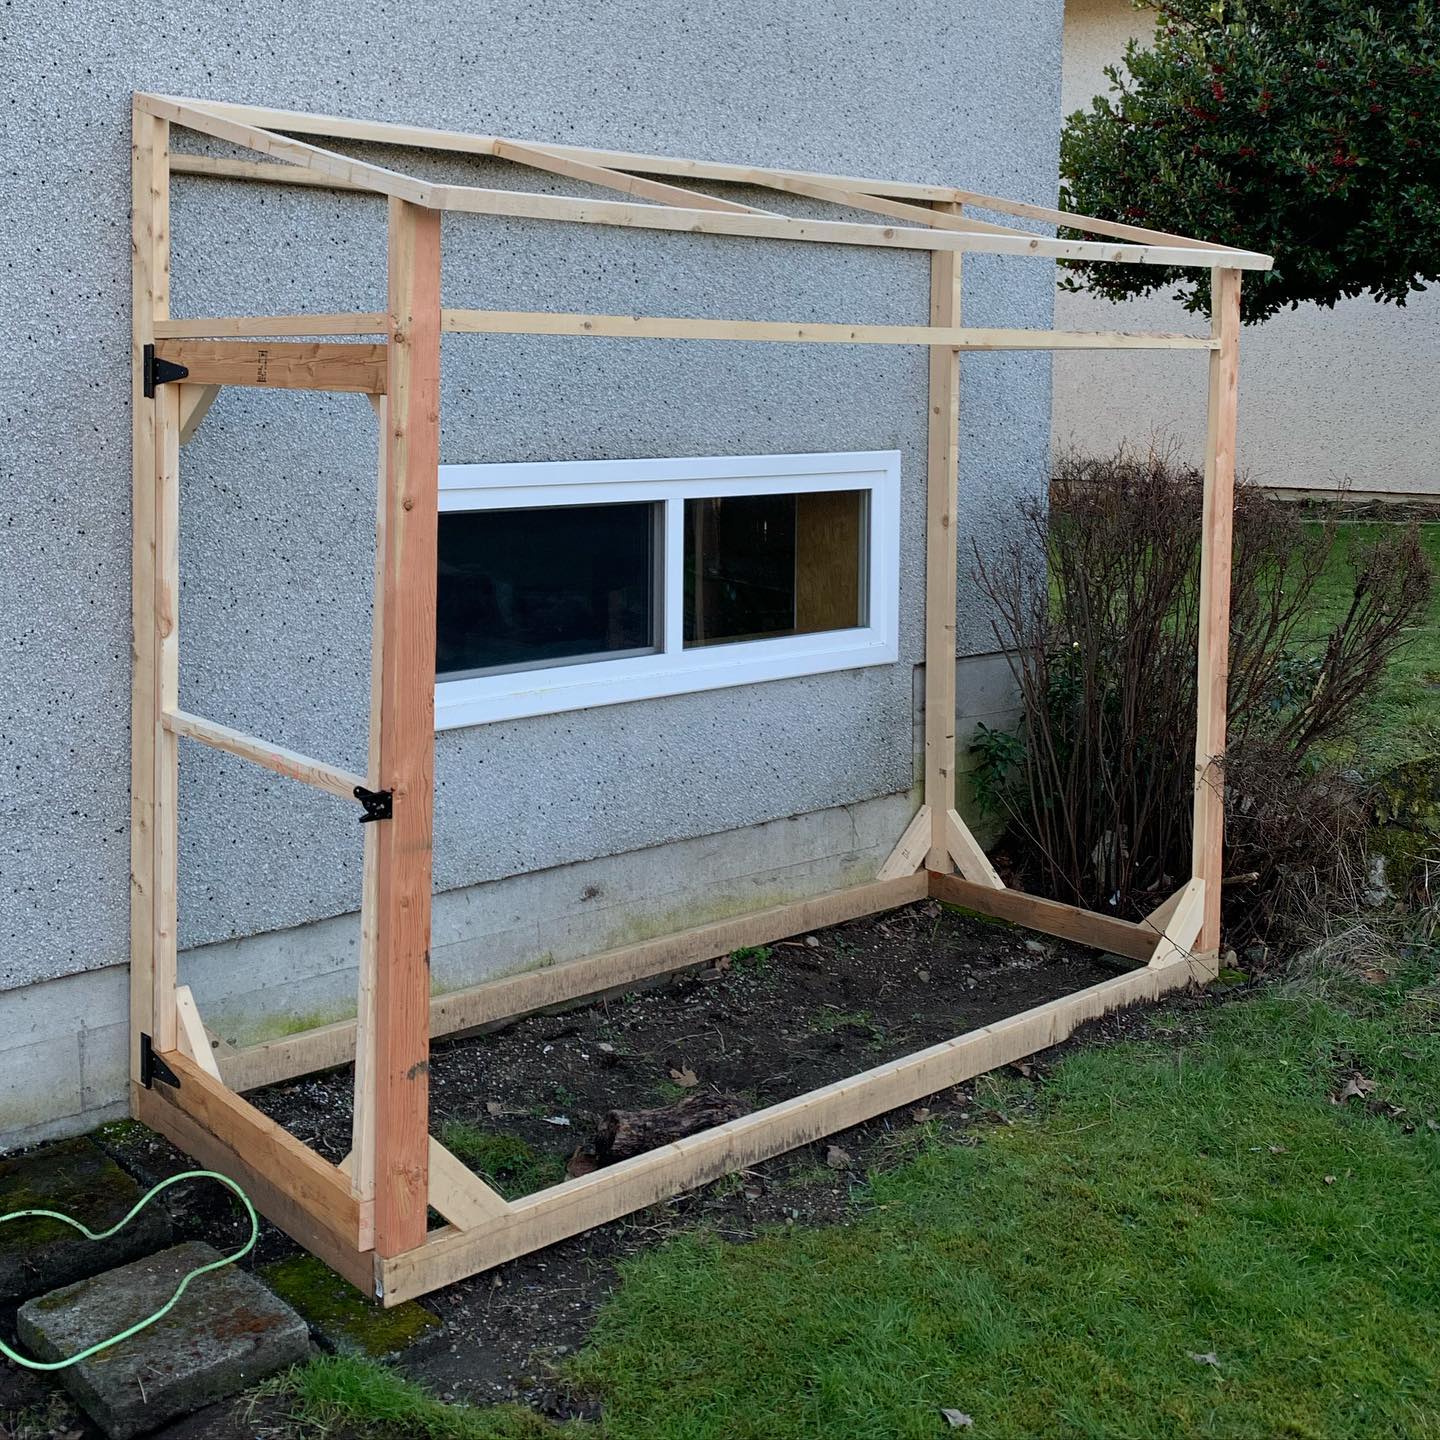 Made more progress on my latest backyard project. This time it’s a catio for @jon.snow.the.cat.yyj He’s a bit wild at times and we think he’ll enjoy more fresh air and an improved bird watching location.  Roofing, mesh sides, rock filled flooring then decorate! #catio